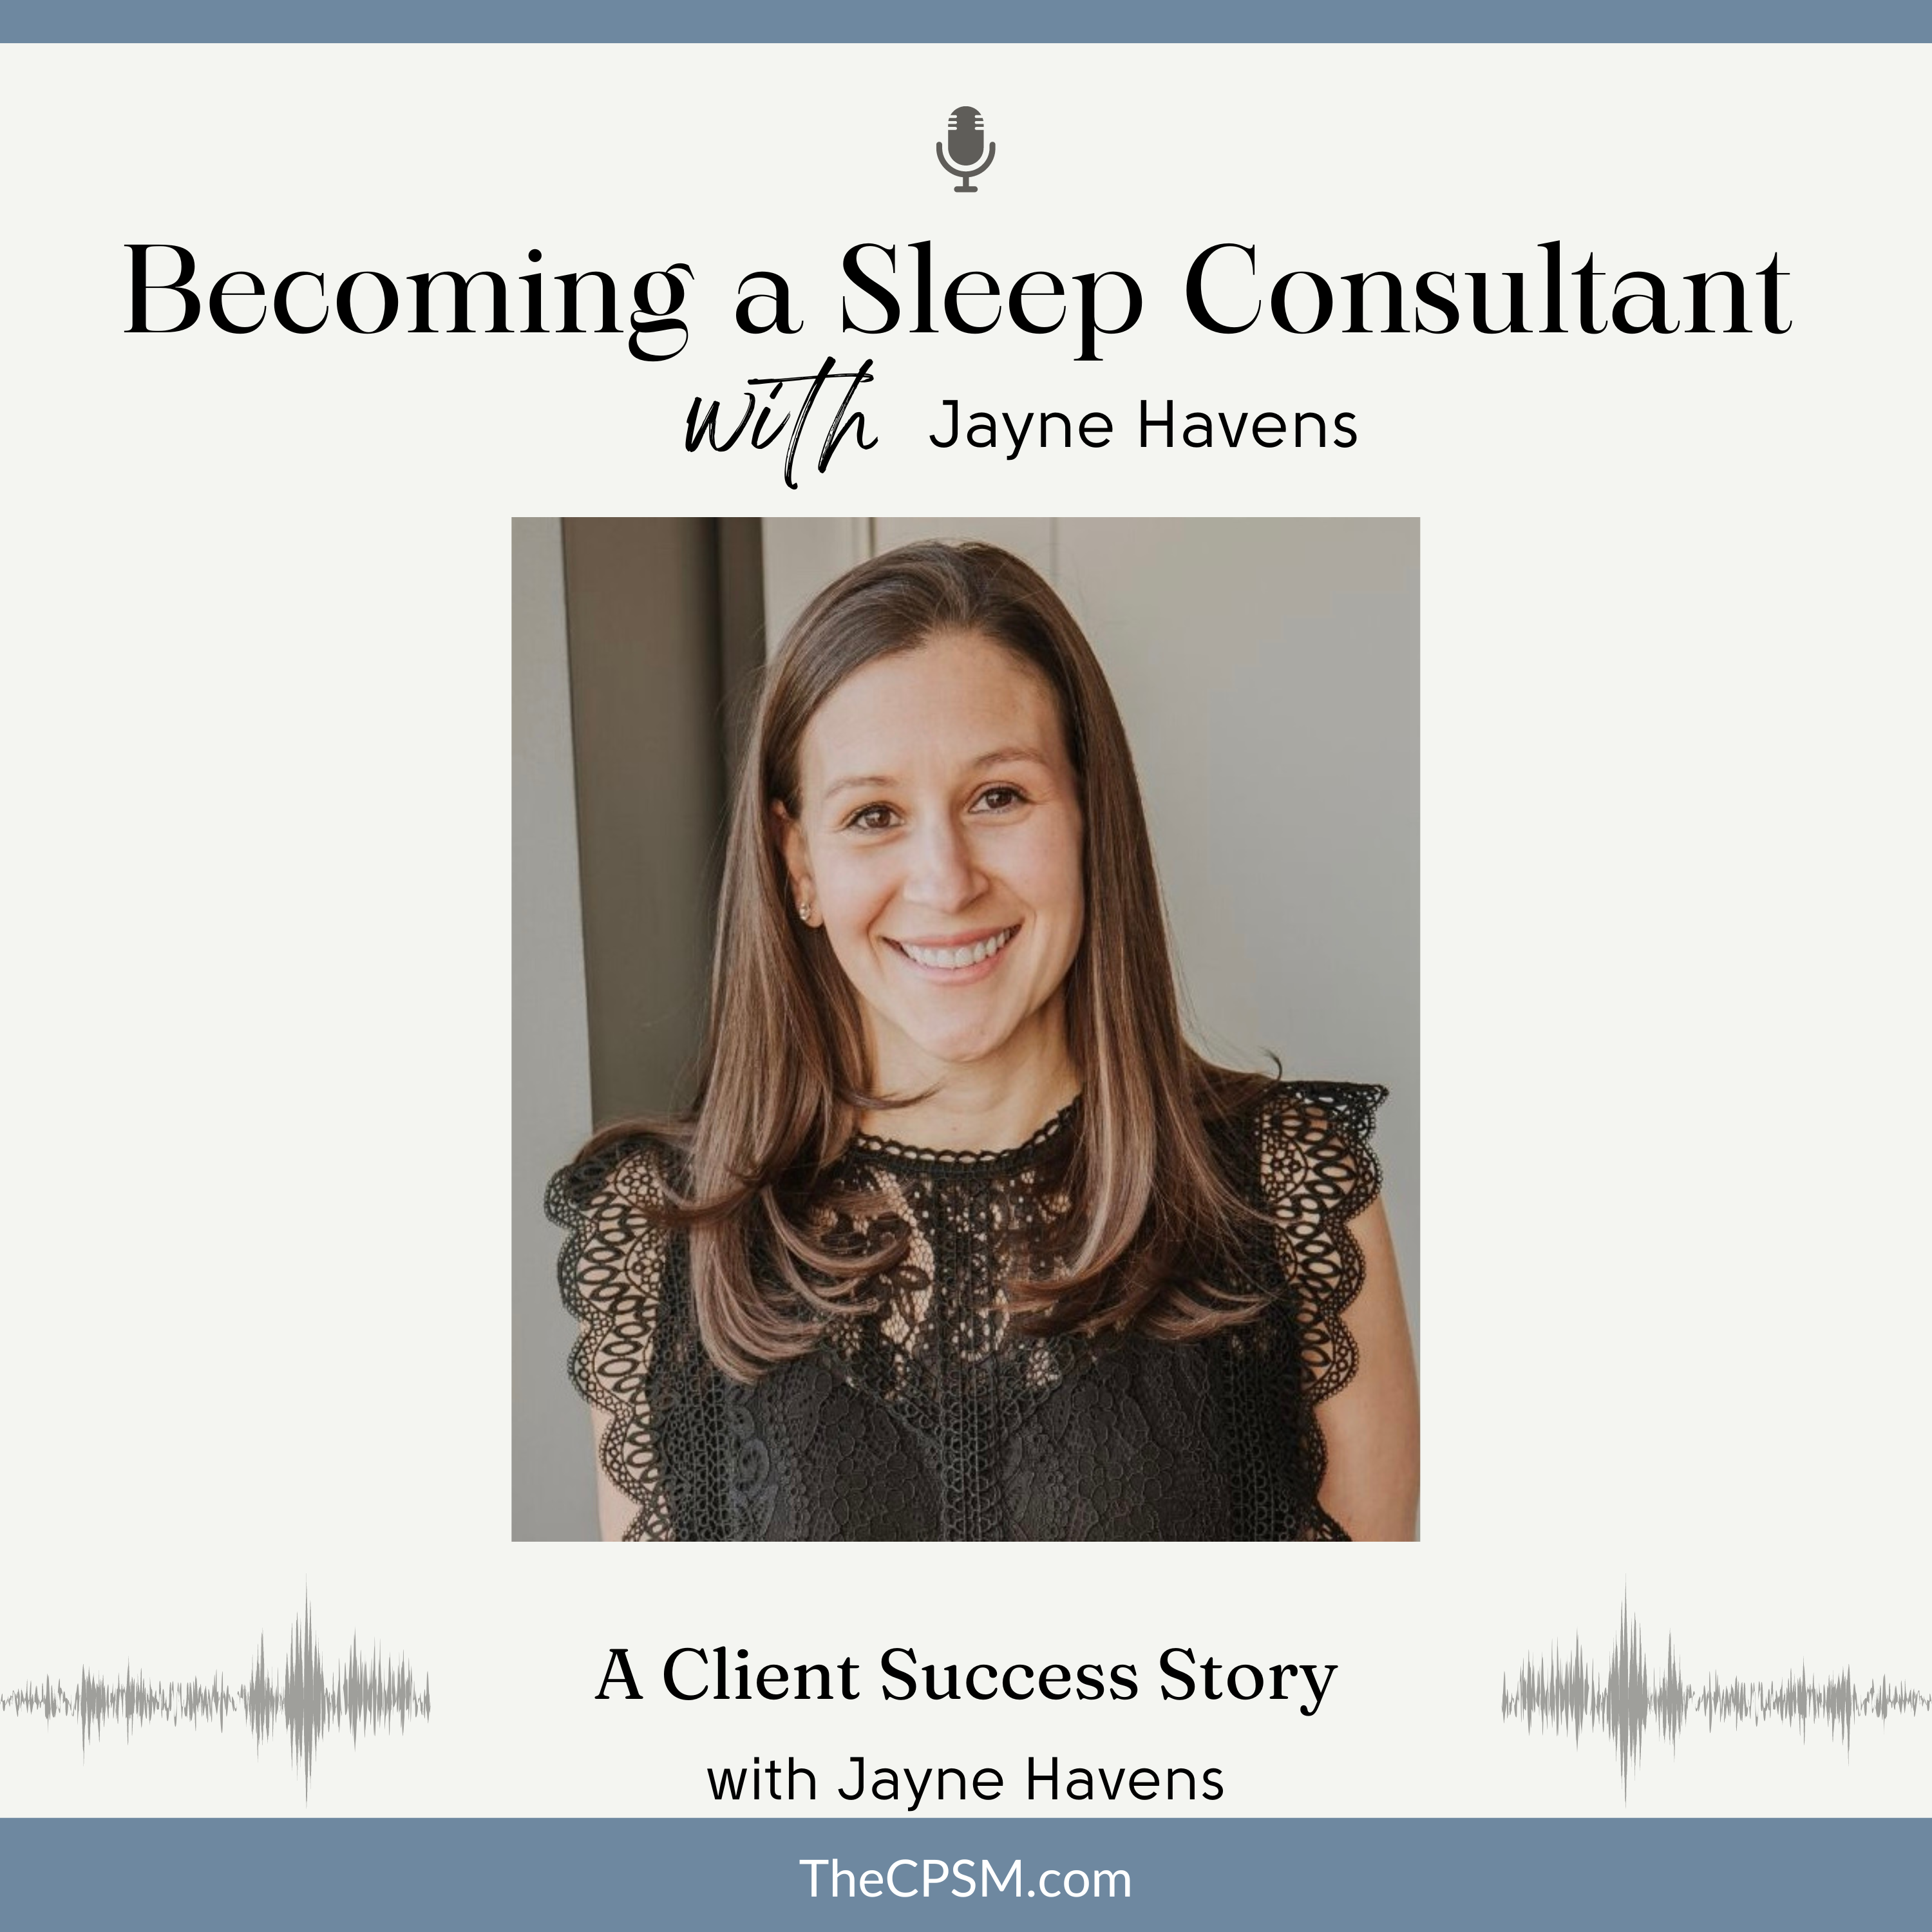 A Client Success Story with Jayne Havens